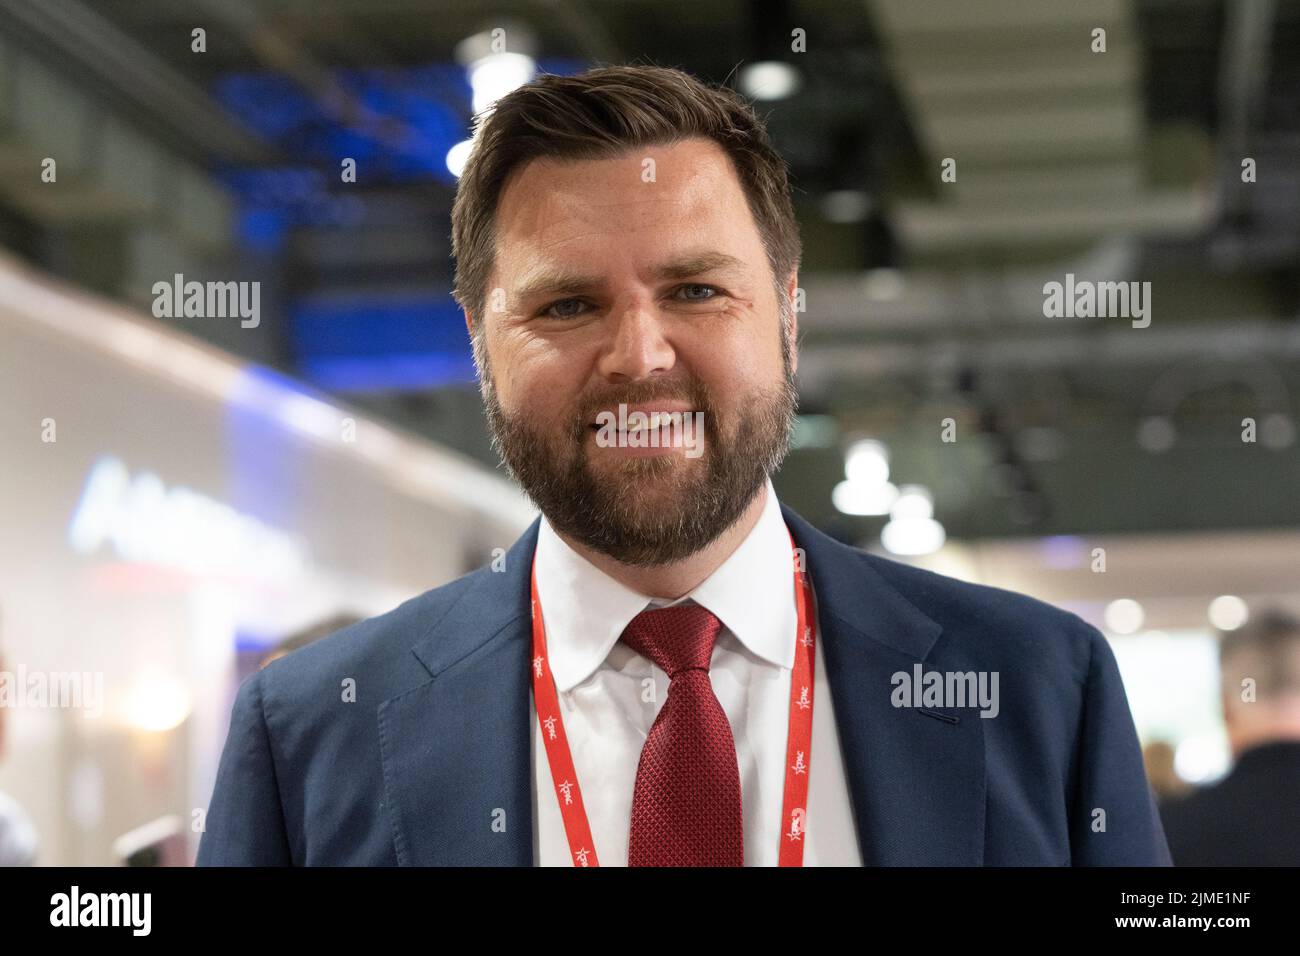 Dallas, TX - August 5, 2022: JD Vance attends CPAC Texas 2022 conference at Hilton Anatole Stock Photo